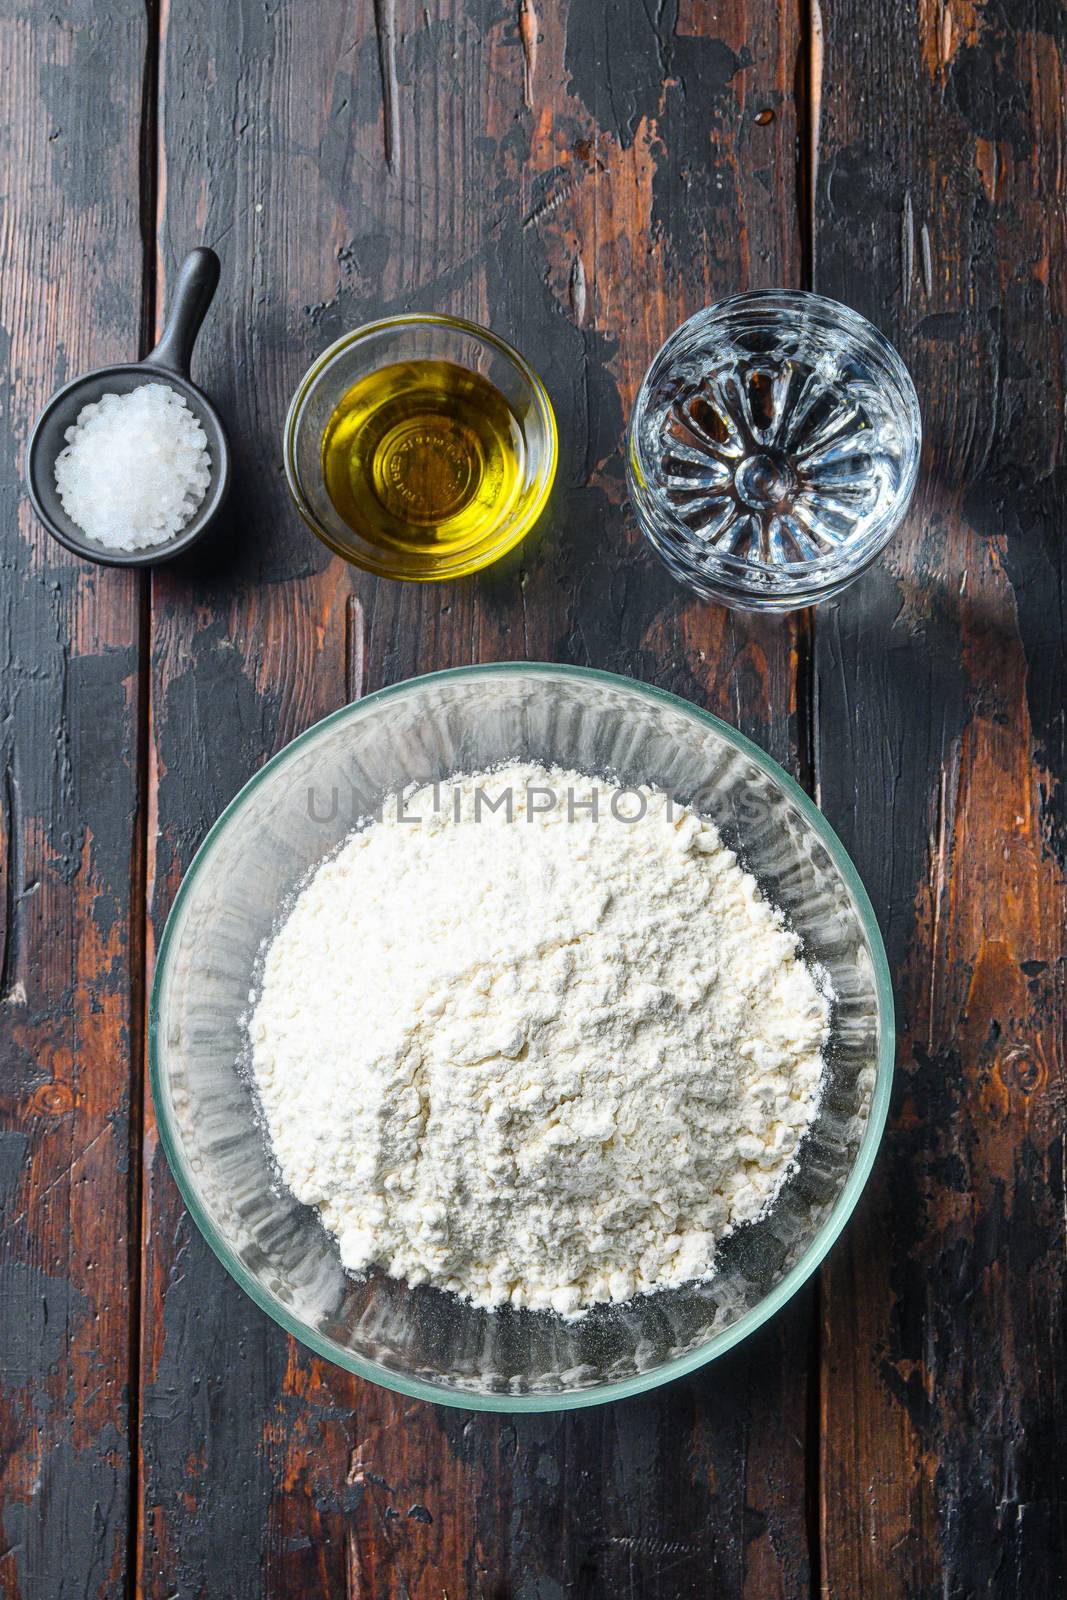 Ingredients for the dough, flour oil water and salt on wood background.